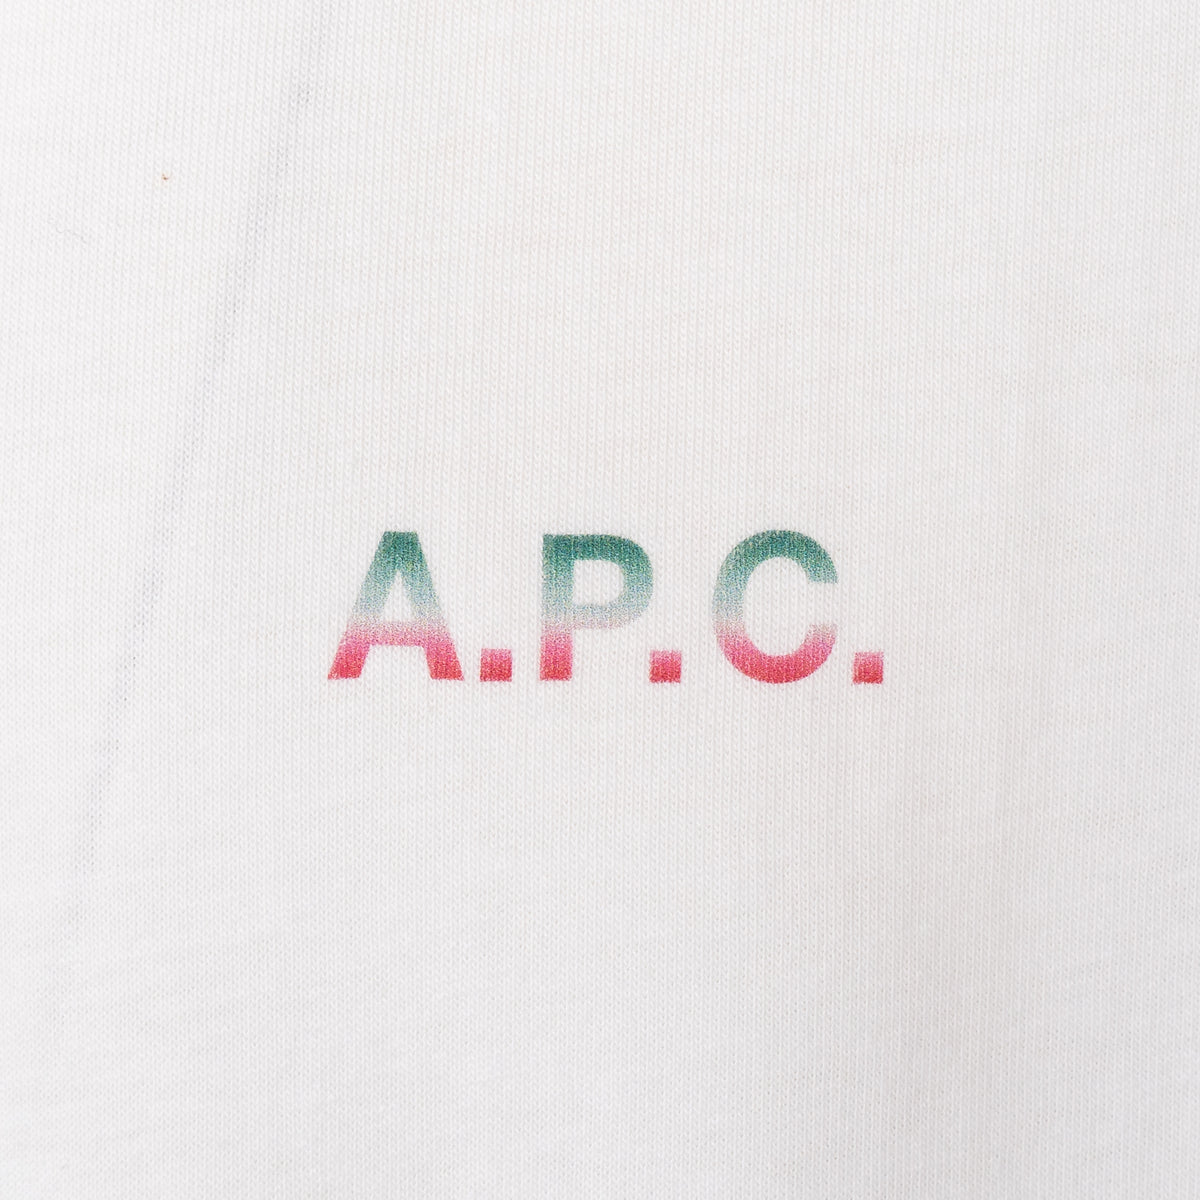 Load image into Gallery viewer, A.P.C. White Nolan Logo Tee
